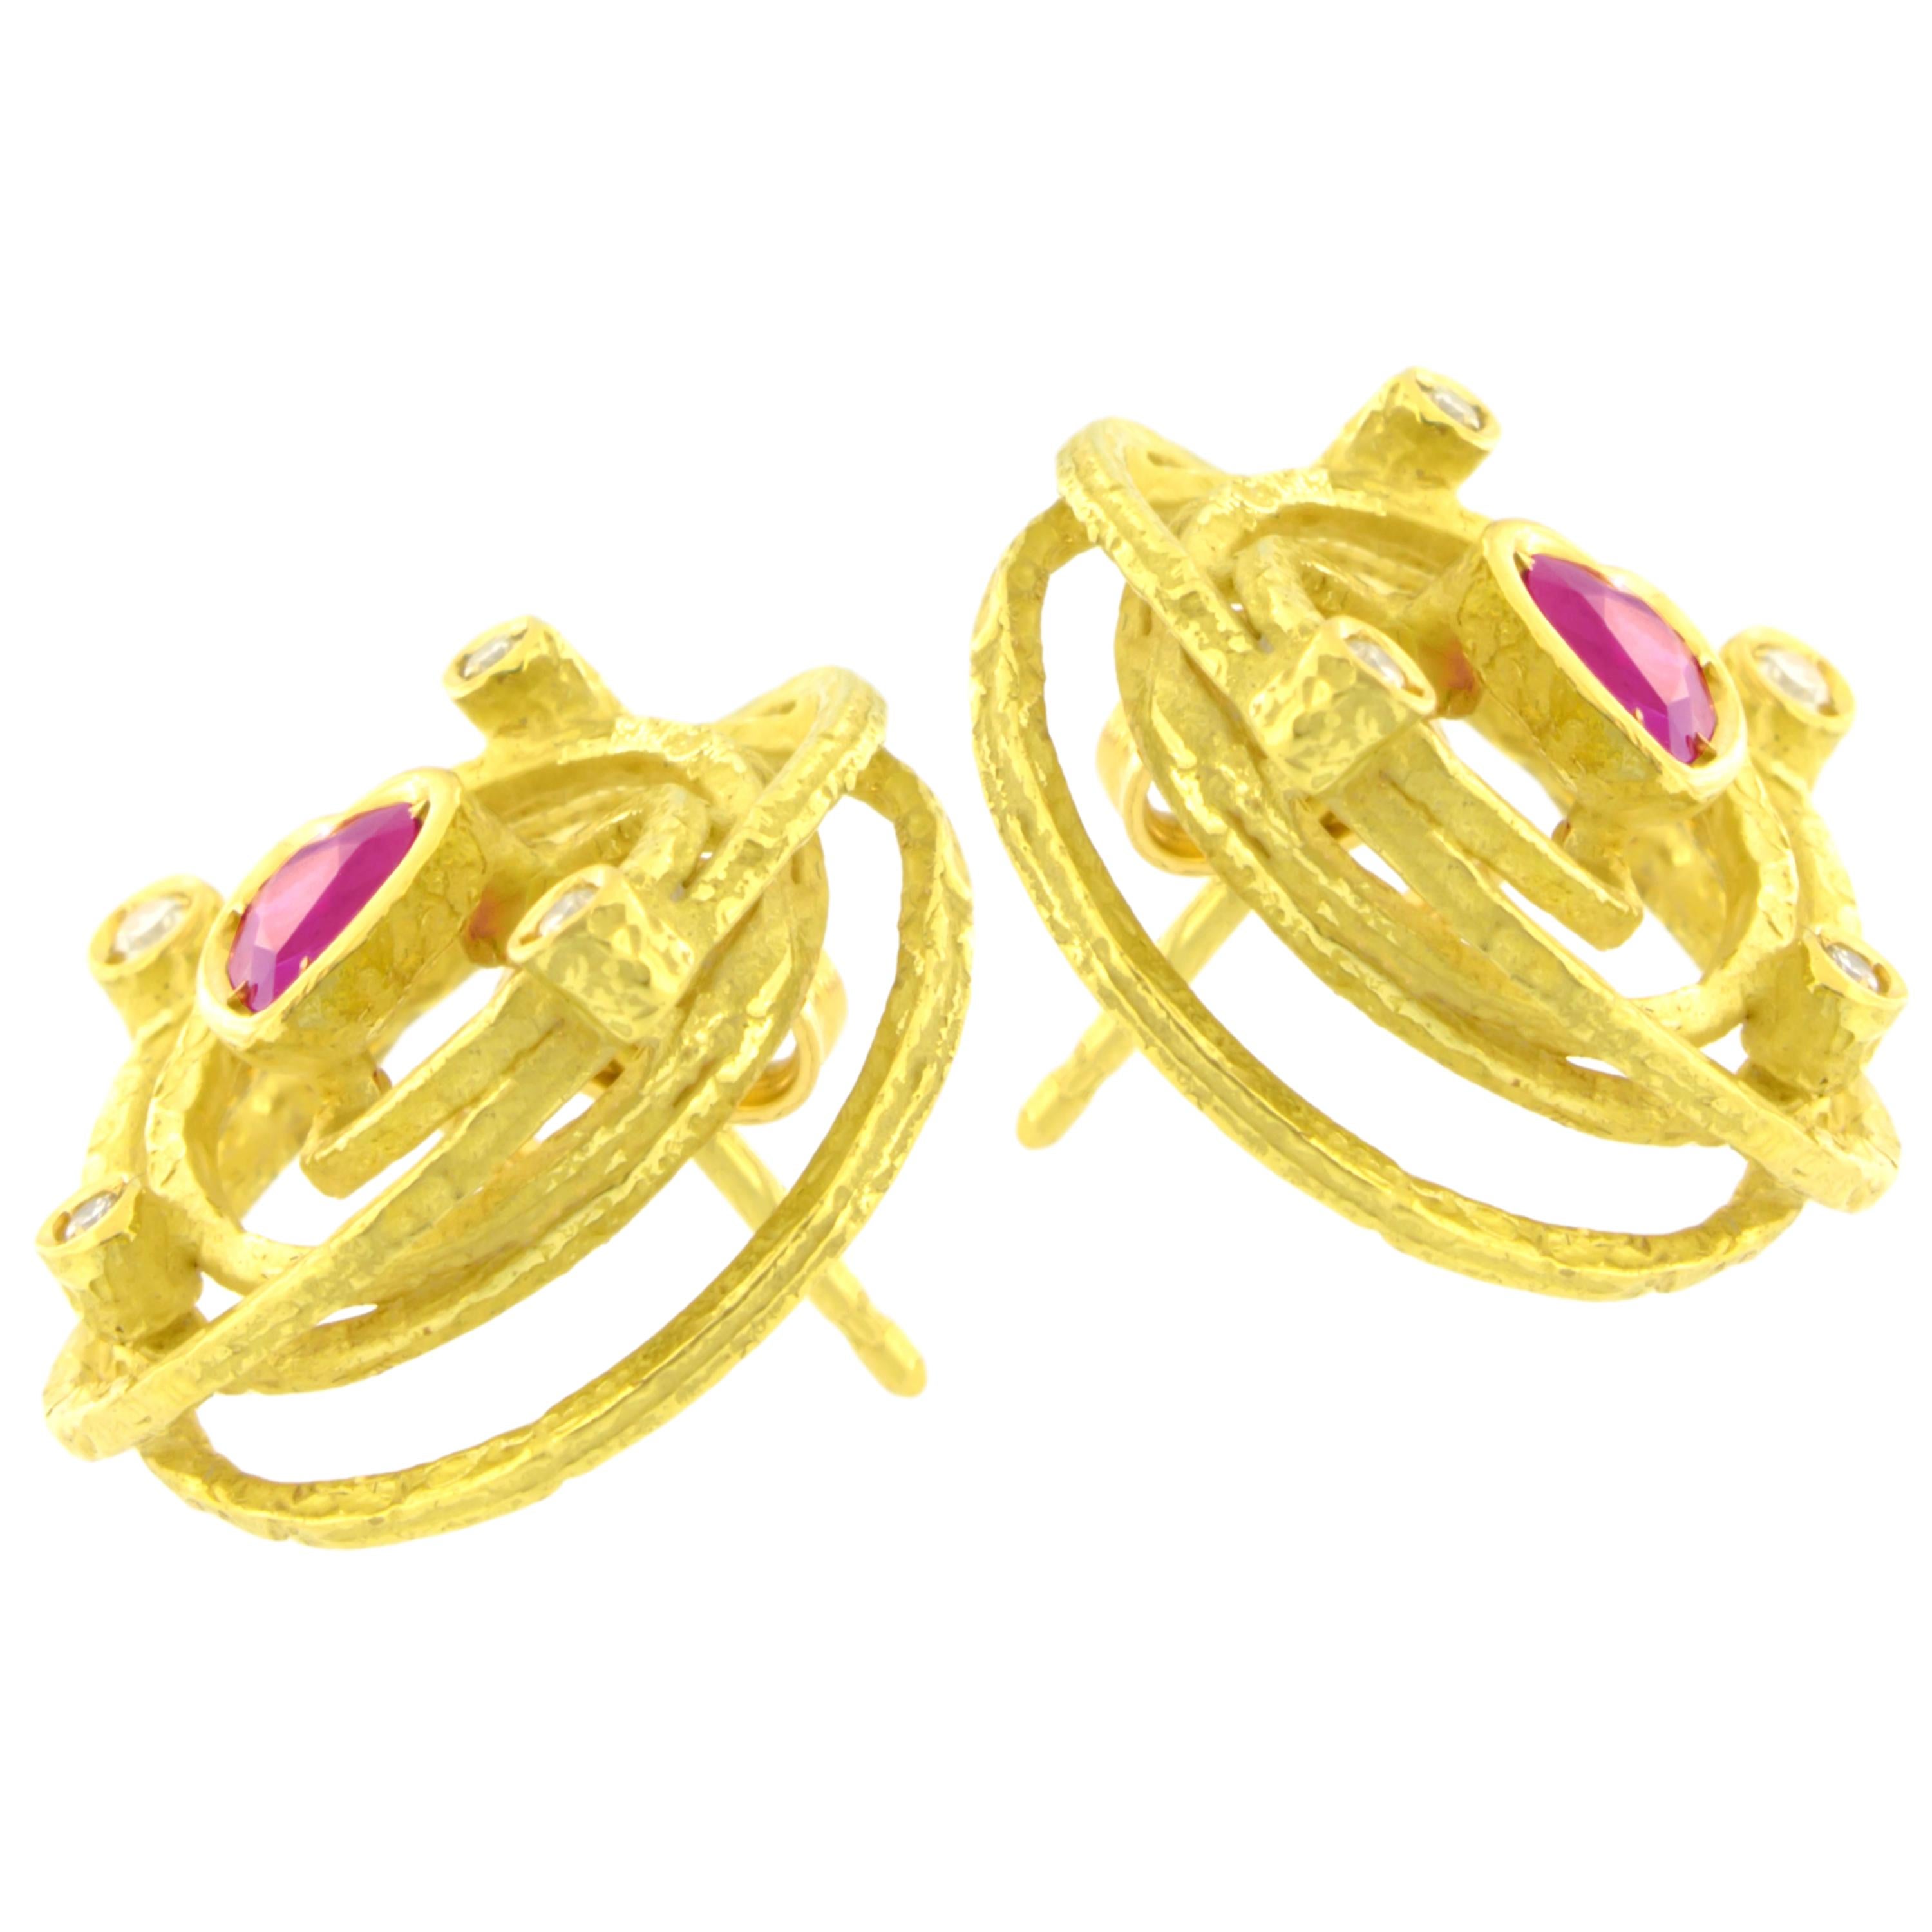 Lovely Heart Ruby and Satin Yellow Gold Earrings, from Sacchi’s Universe Collection, hand-crafted with lost-wax casting technique.

Lost-wax casting, one of the oldest techniques for creating jewelry, forms the basis of Sacchi's jewelry production.